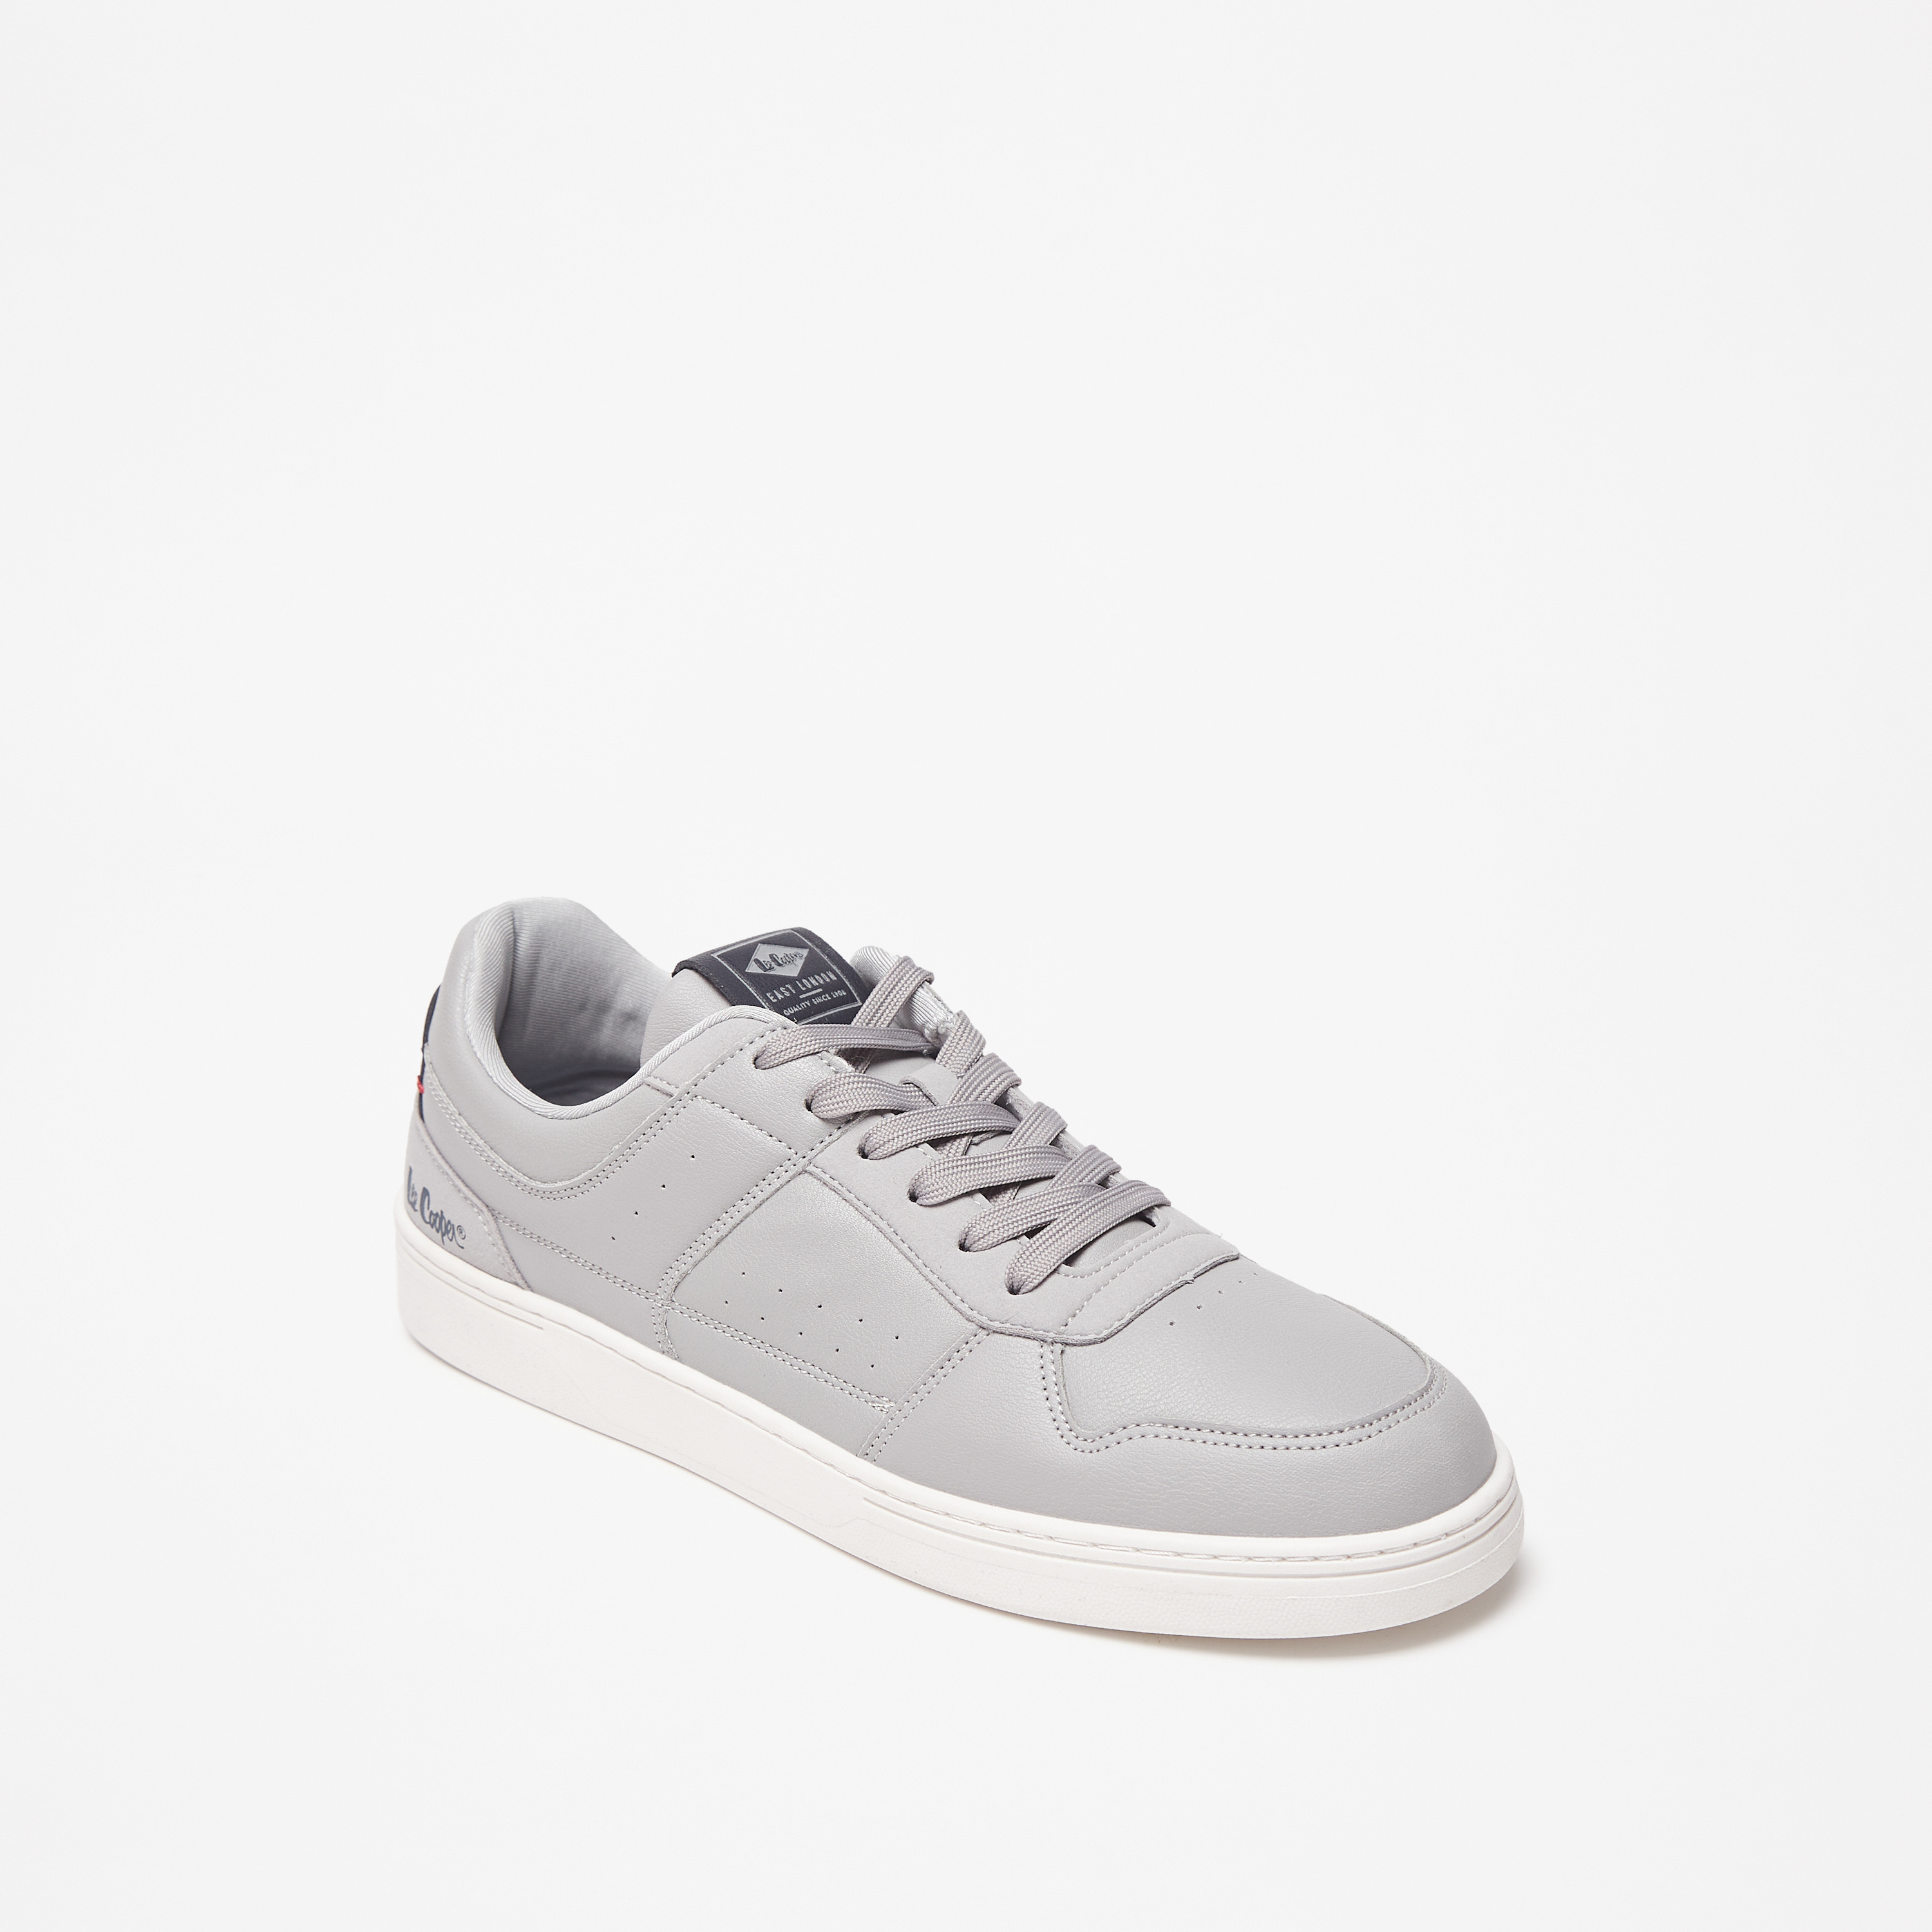 Knitted Look SB/SRA Lightweight Safety Trainers | Lee Cooper Workwear